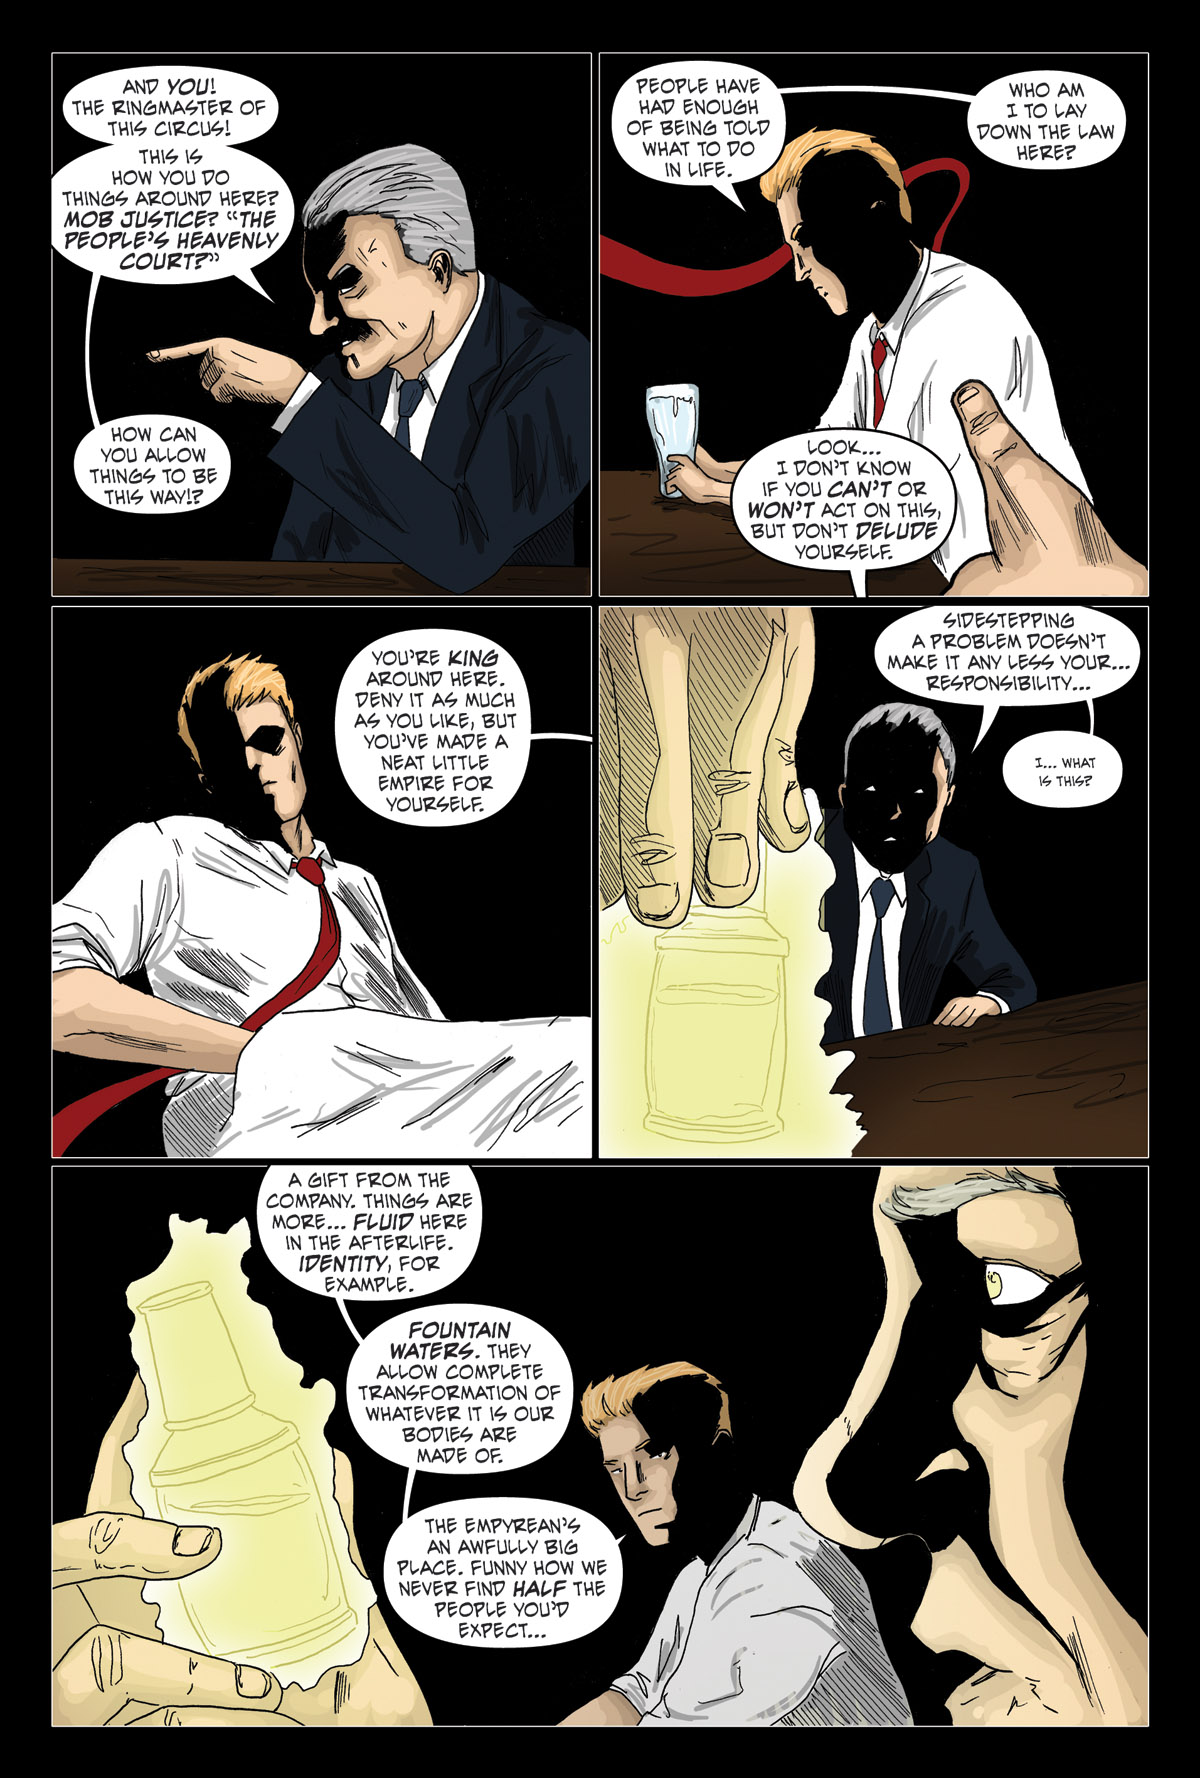 Afterlife Inc. | Silver Screen | Page 5